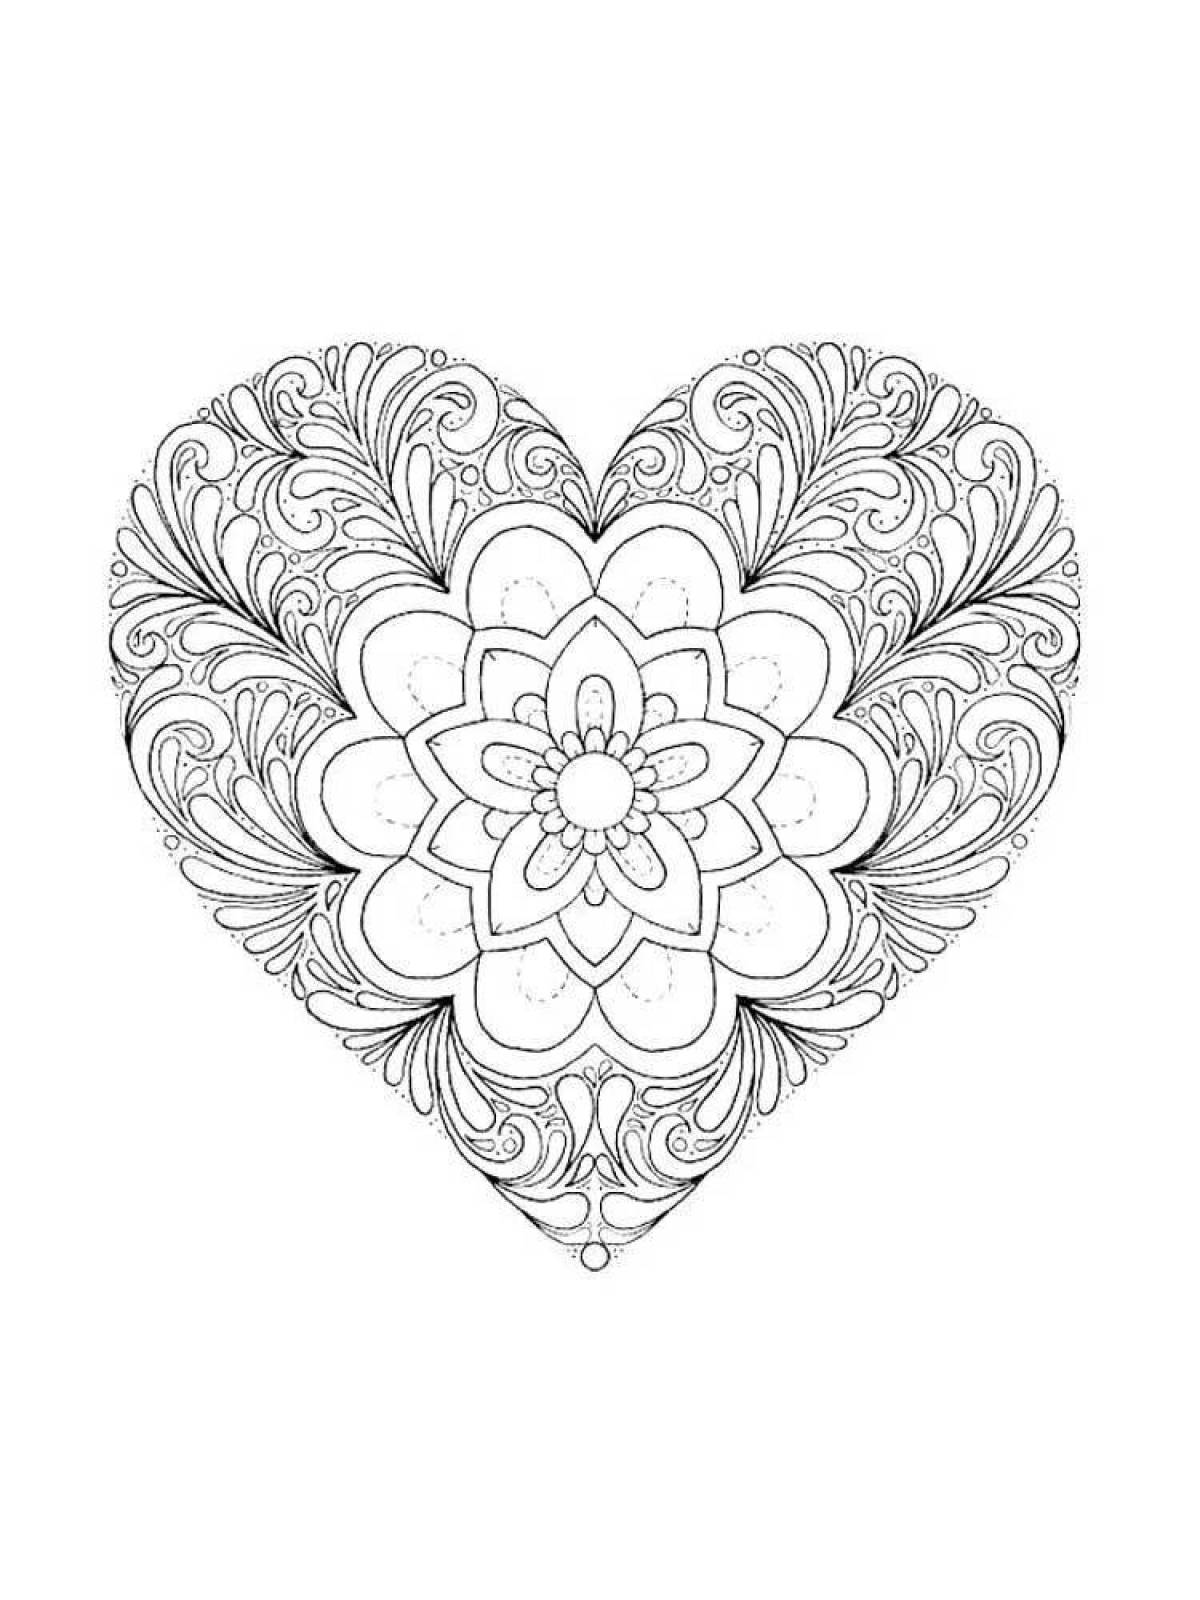 Coloring book soothing heart antistress